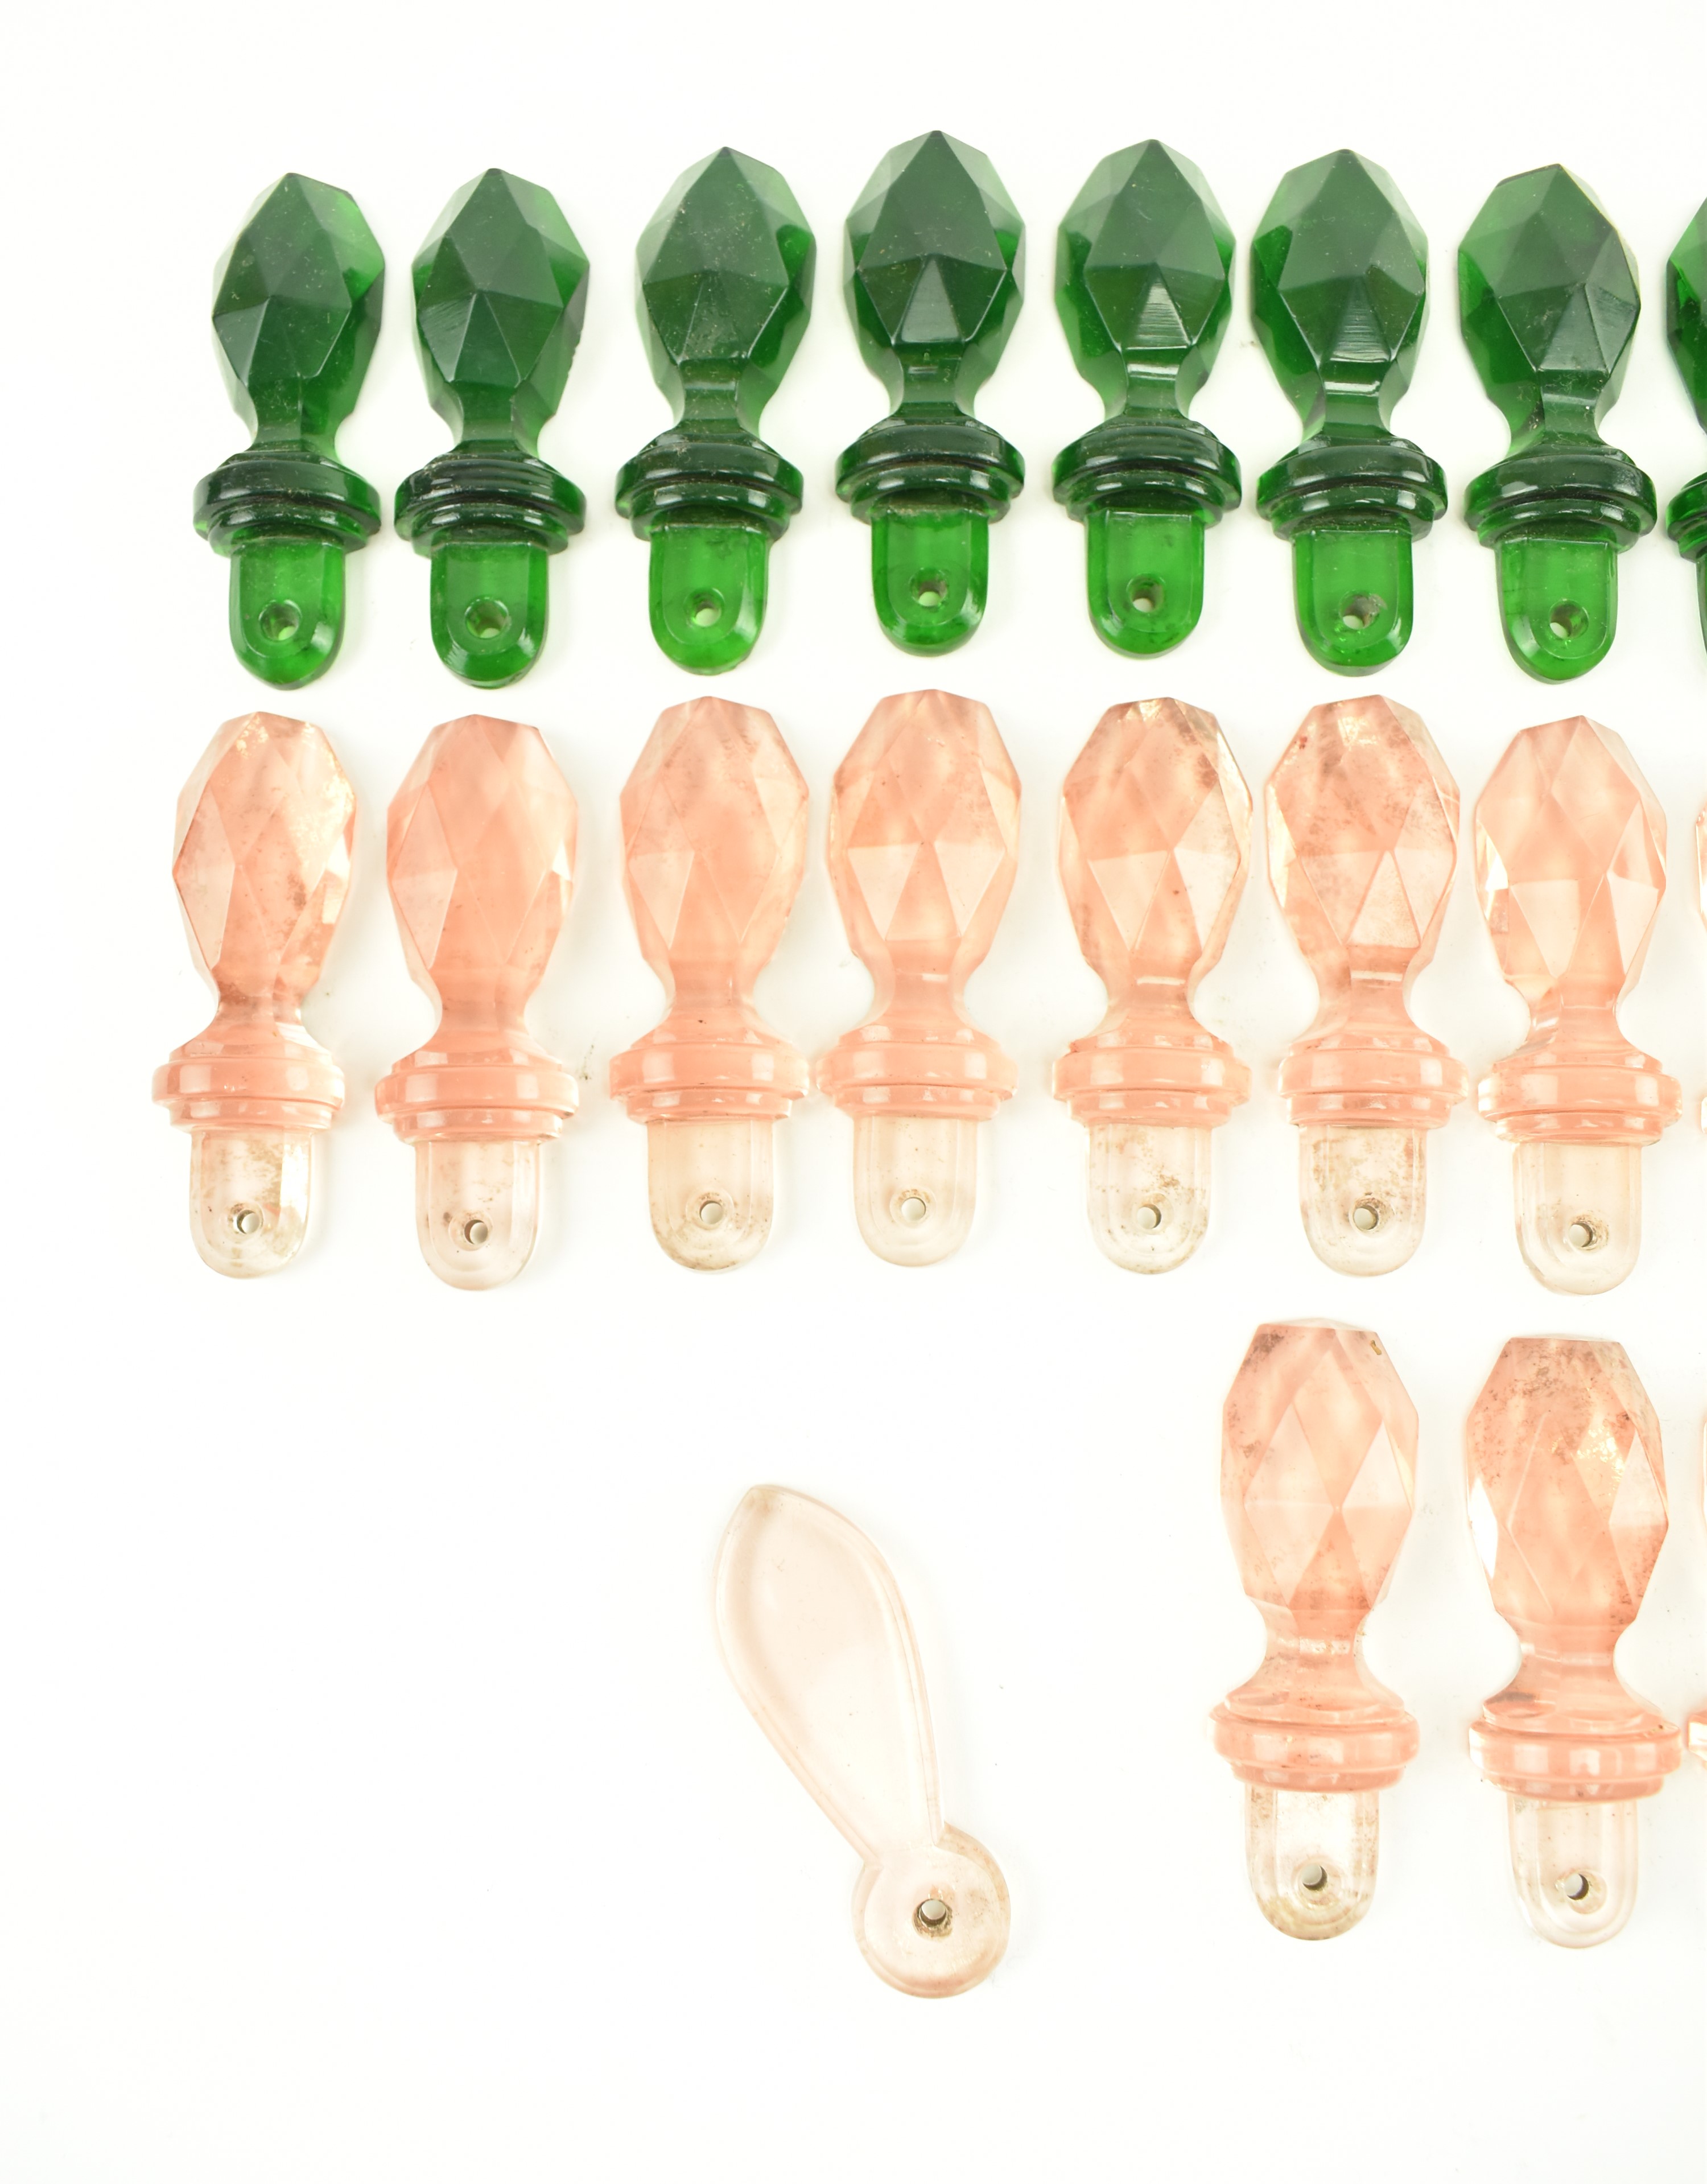 INTERIORS. COLLECTION OF PINK & GREEN CUT GLASS KEYHOLE COVERS - Image 2 of 4